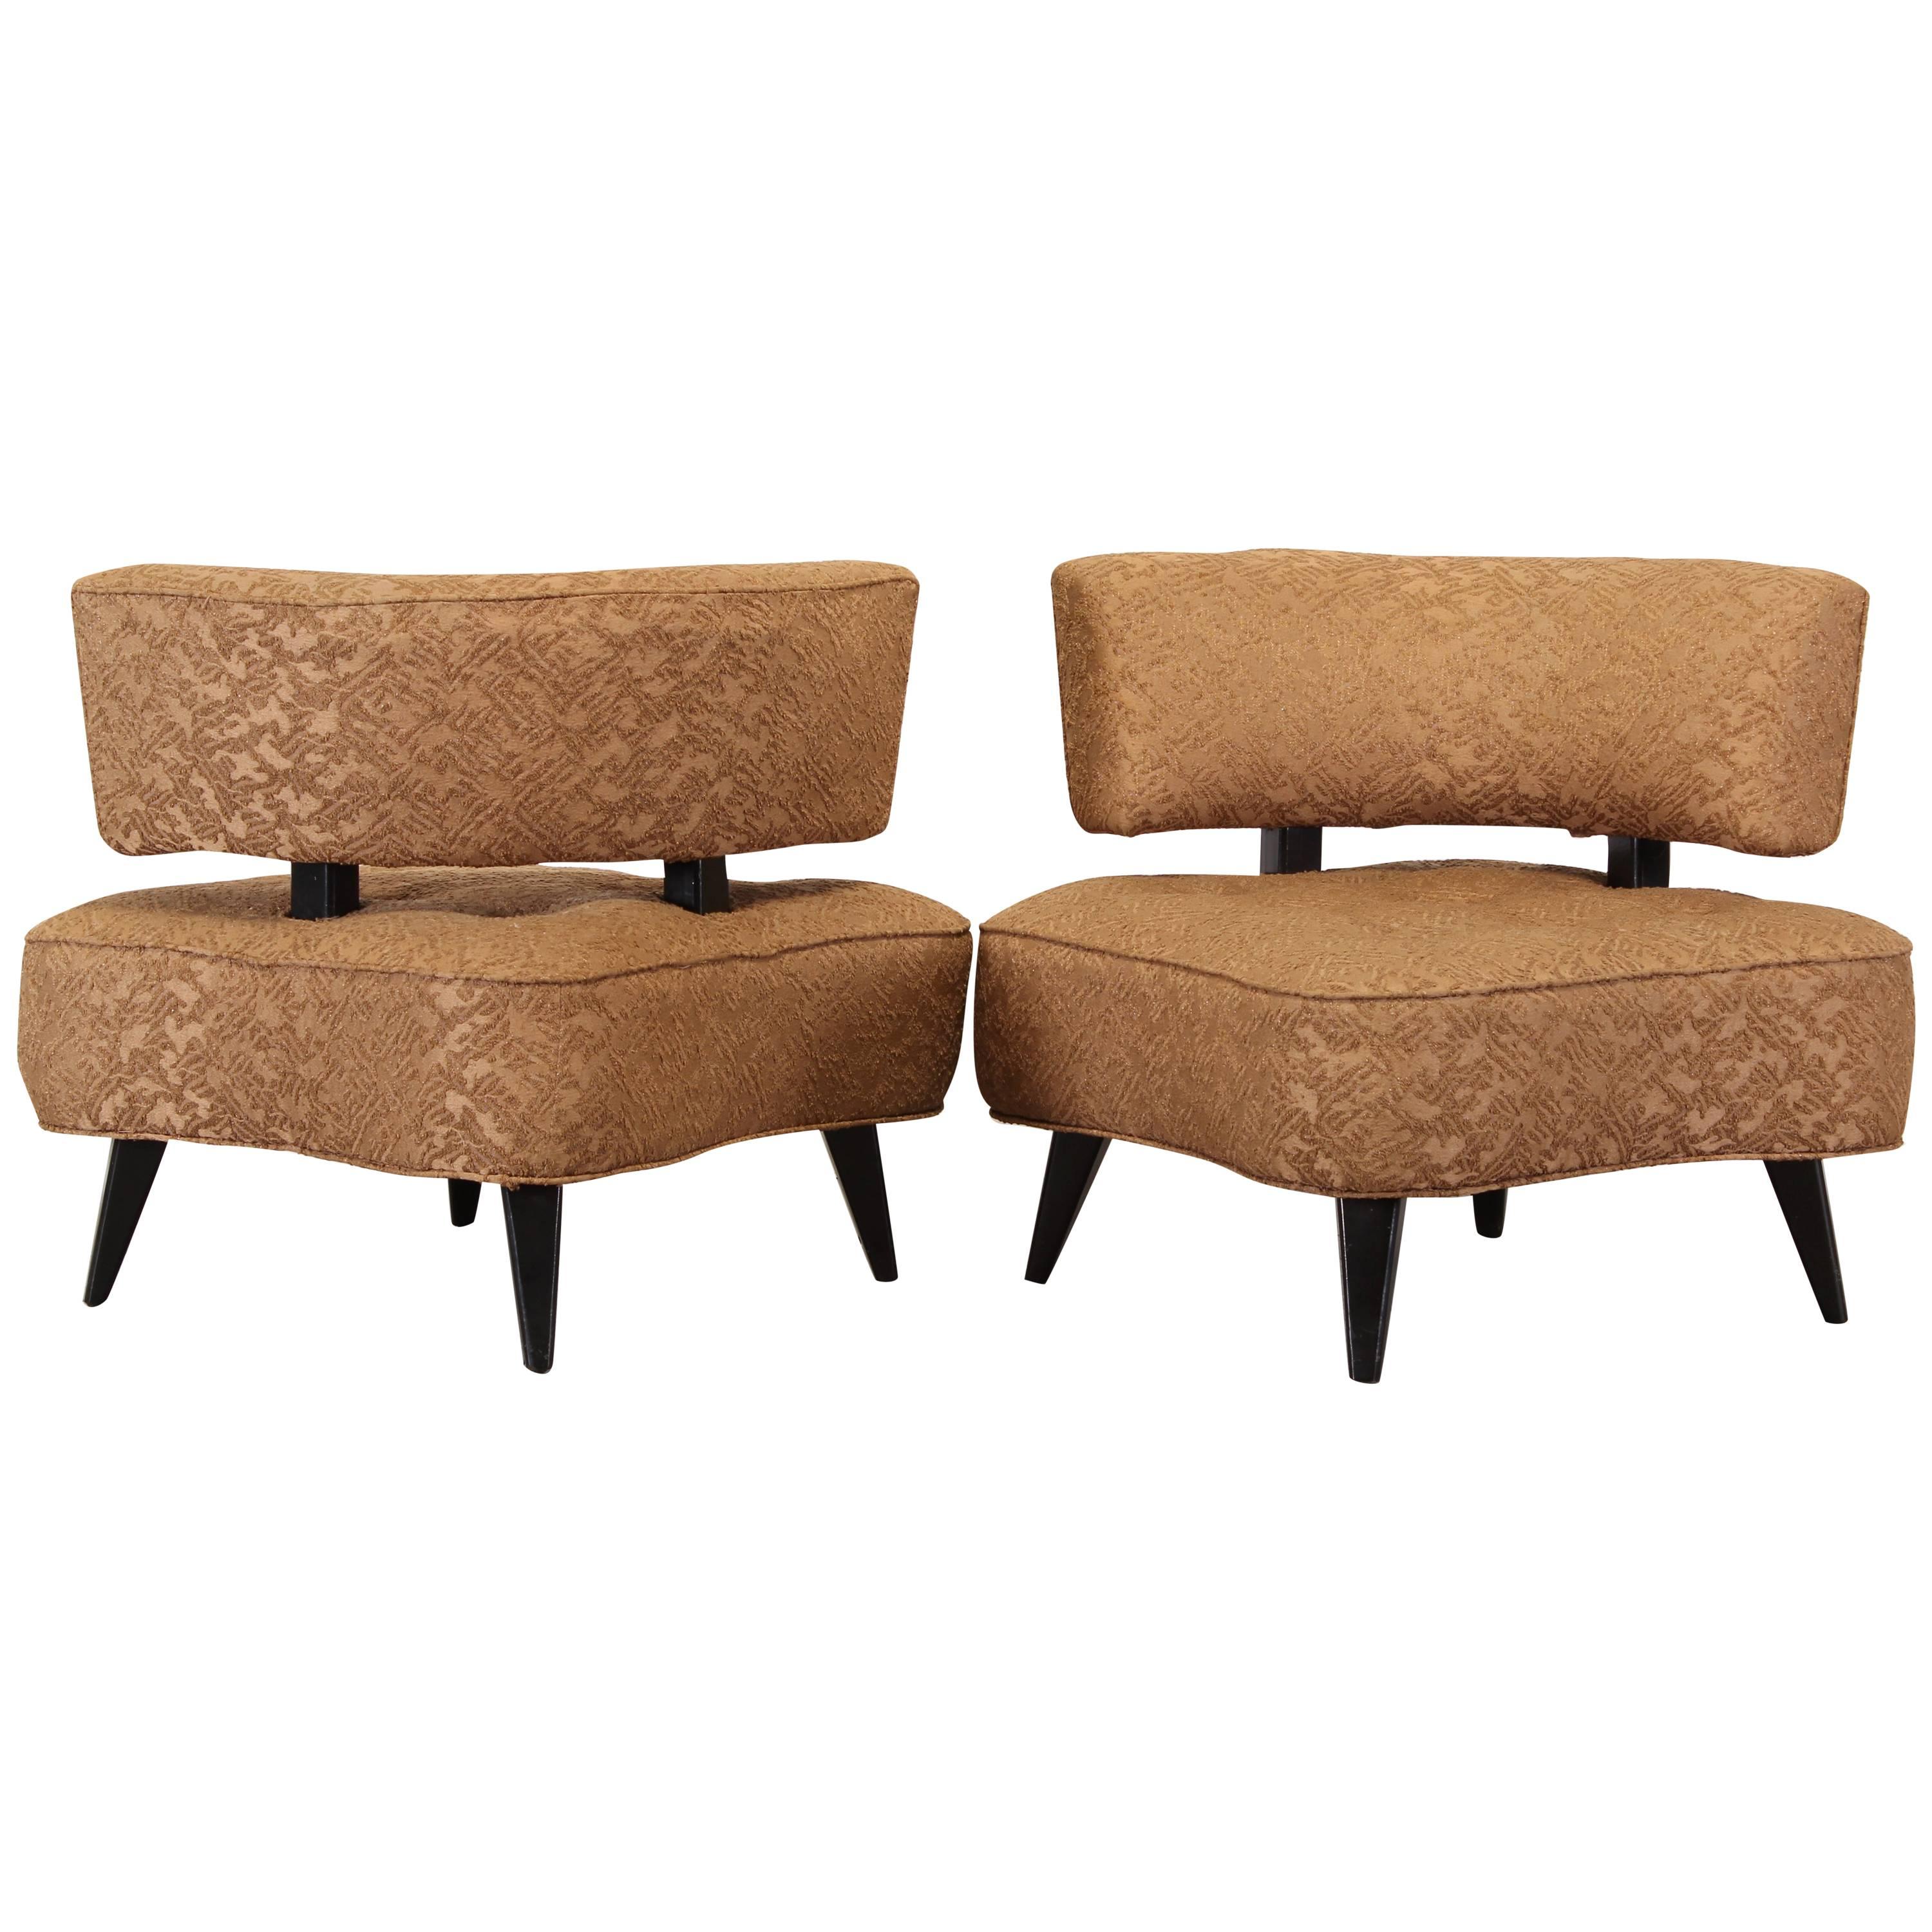 Pair of James Mont Style Chairs, 1940